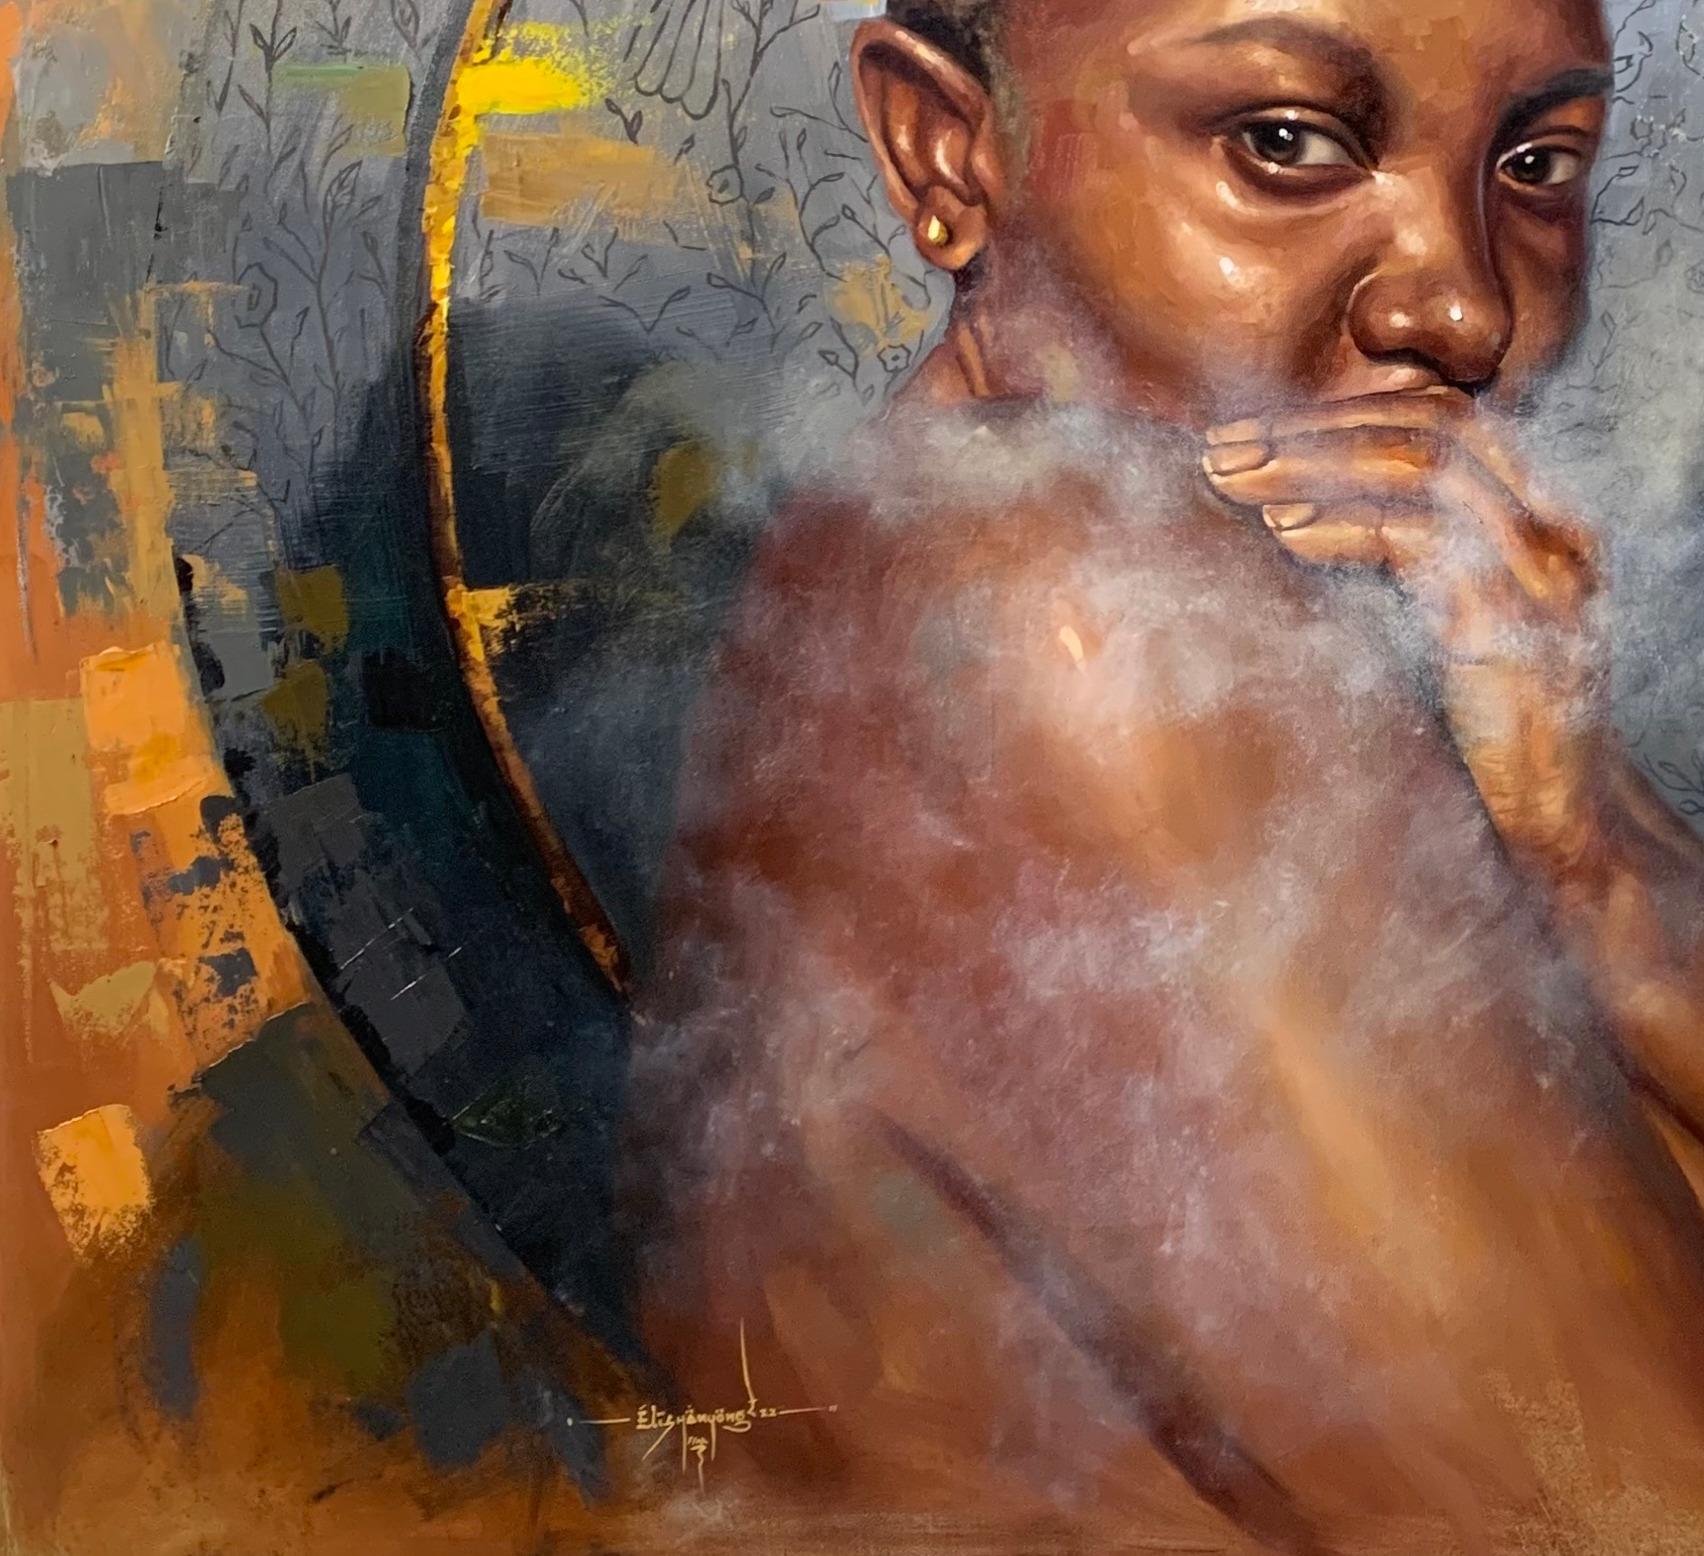 Human nature’s bane is discontentment; The concept of beauty in the contemporary
African is tied around superficial elements like skin tone and hair type. This piece is the second piece of a series titled “Hurricanes of the Soul”. It’s targeted at